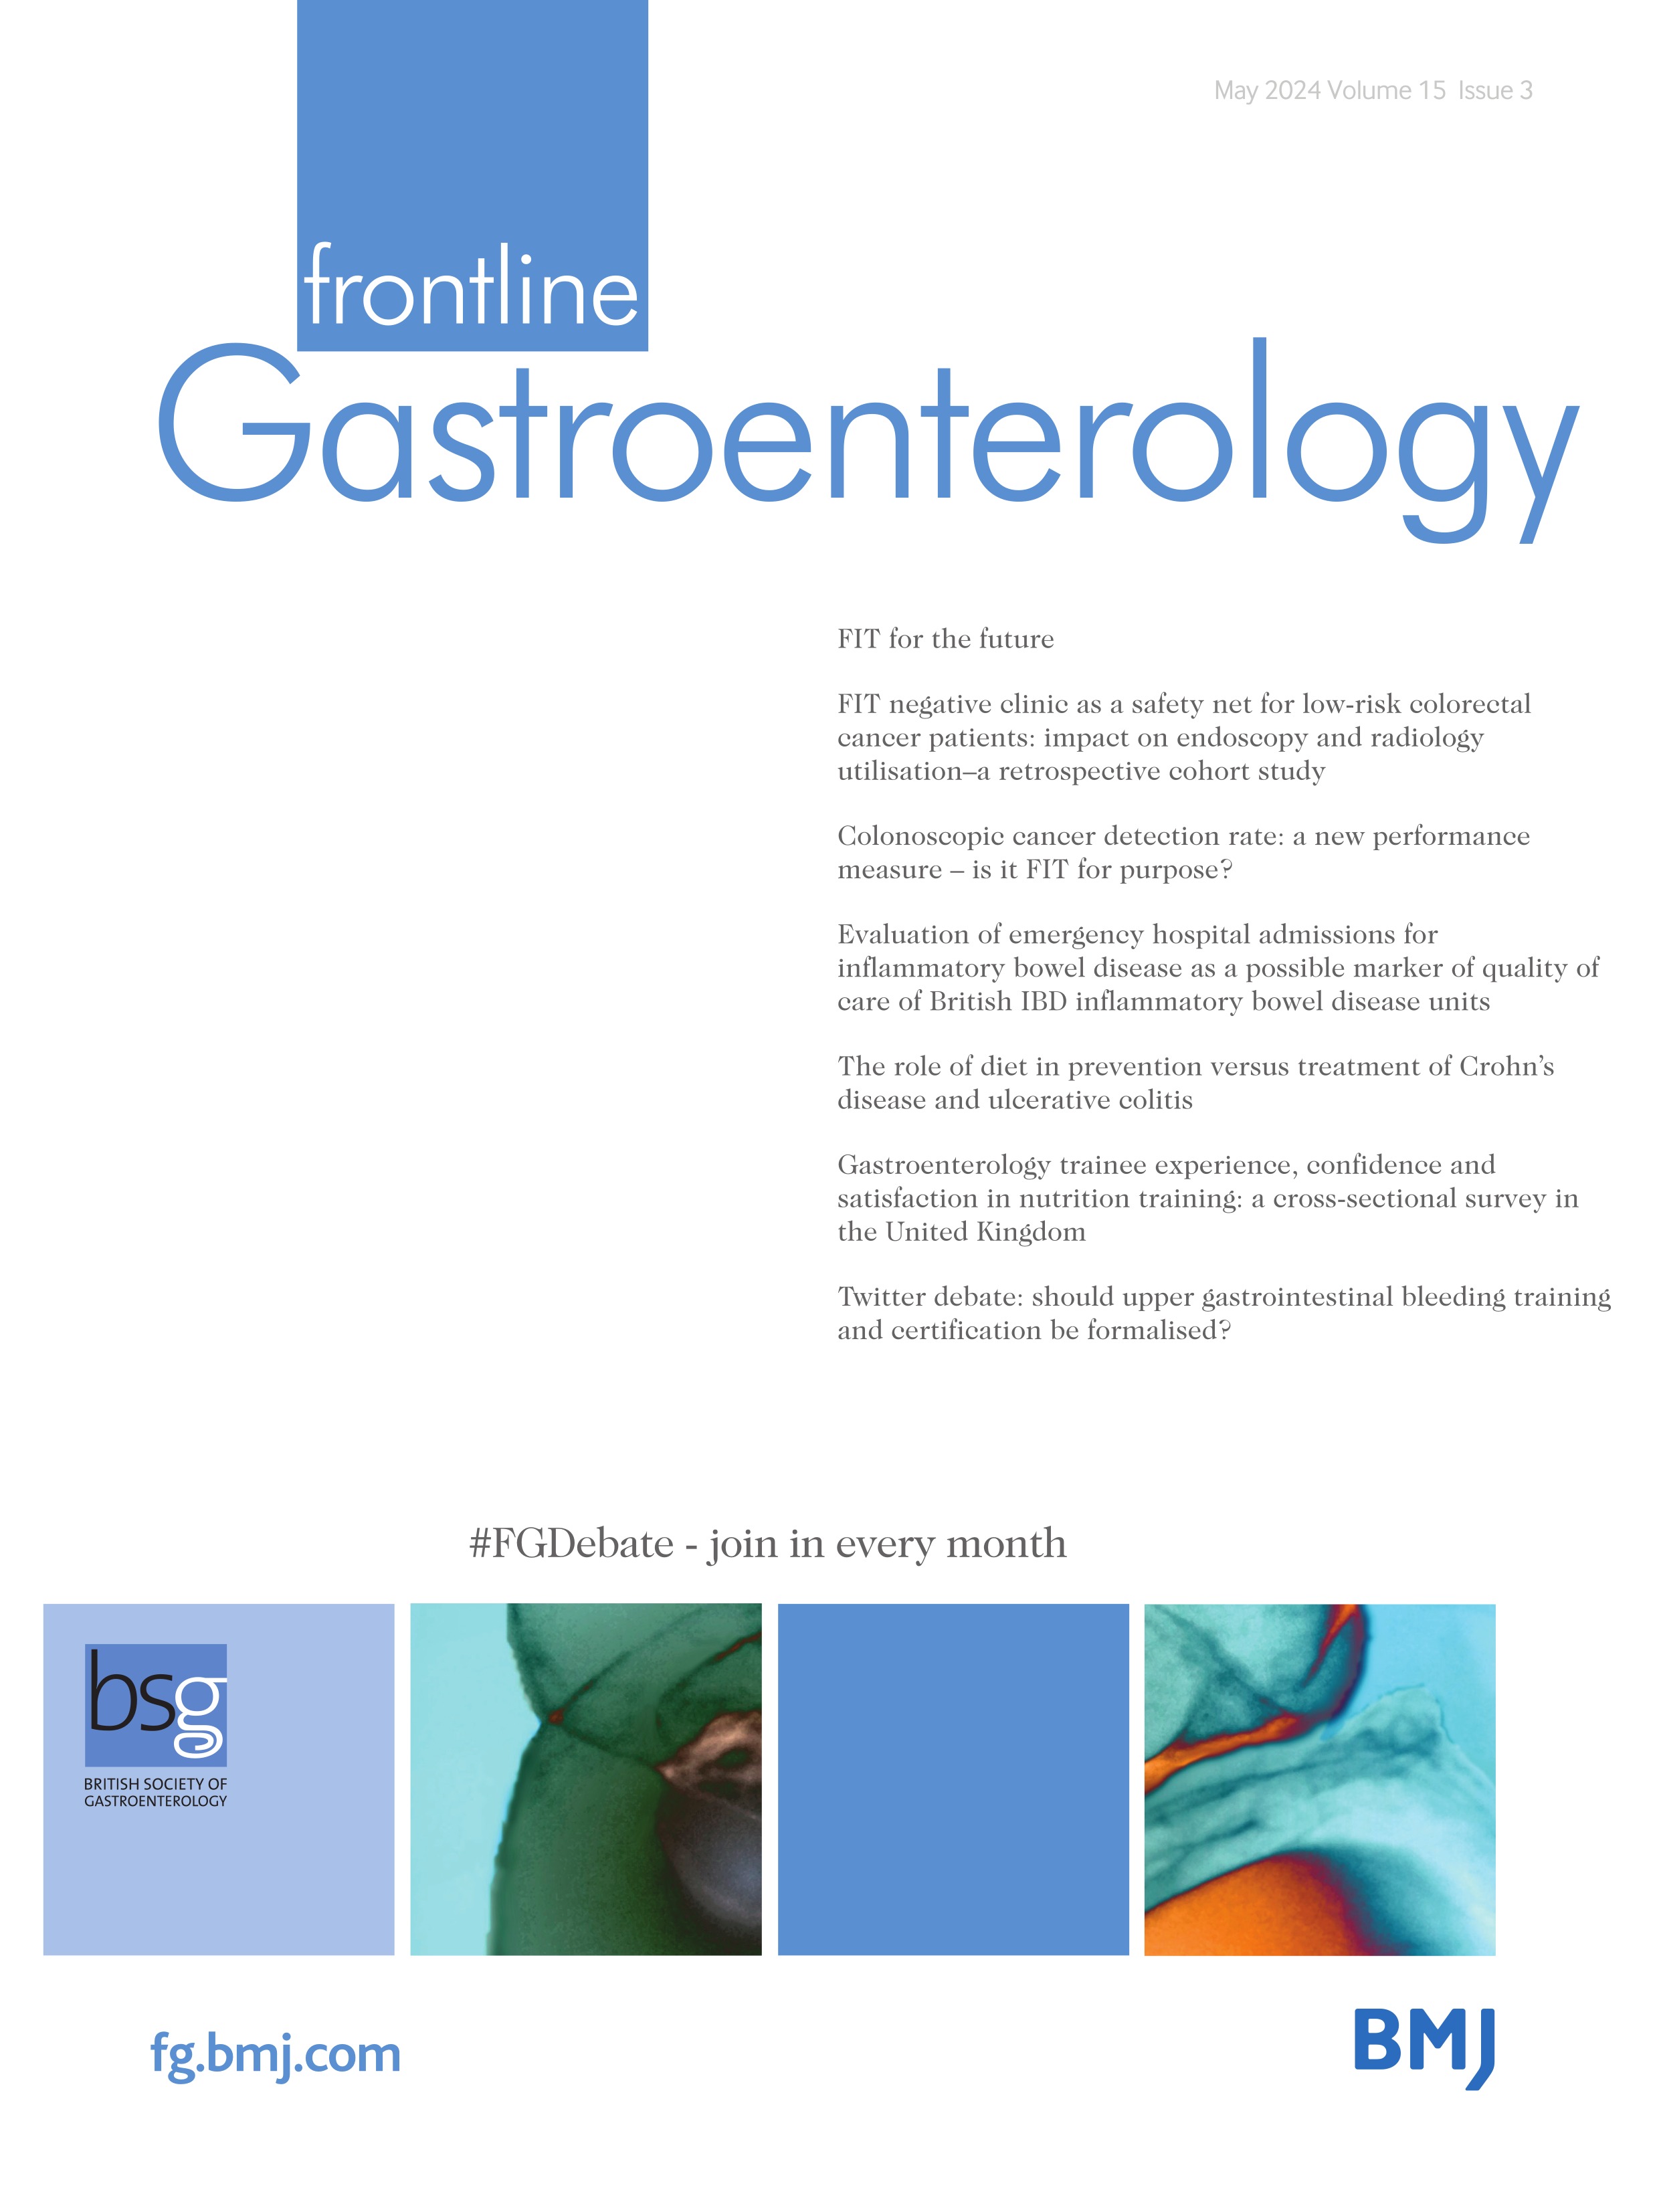 Nutritional assessment of patients with cirrhosis in the South West requires improvement: results of the Evaluation of NutRItion in CirrHosis (ENRICH) Study